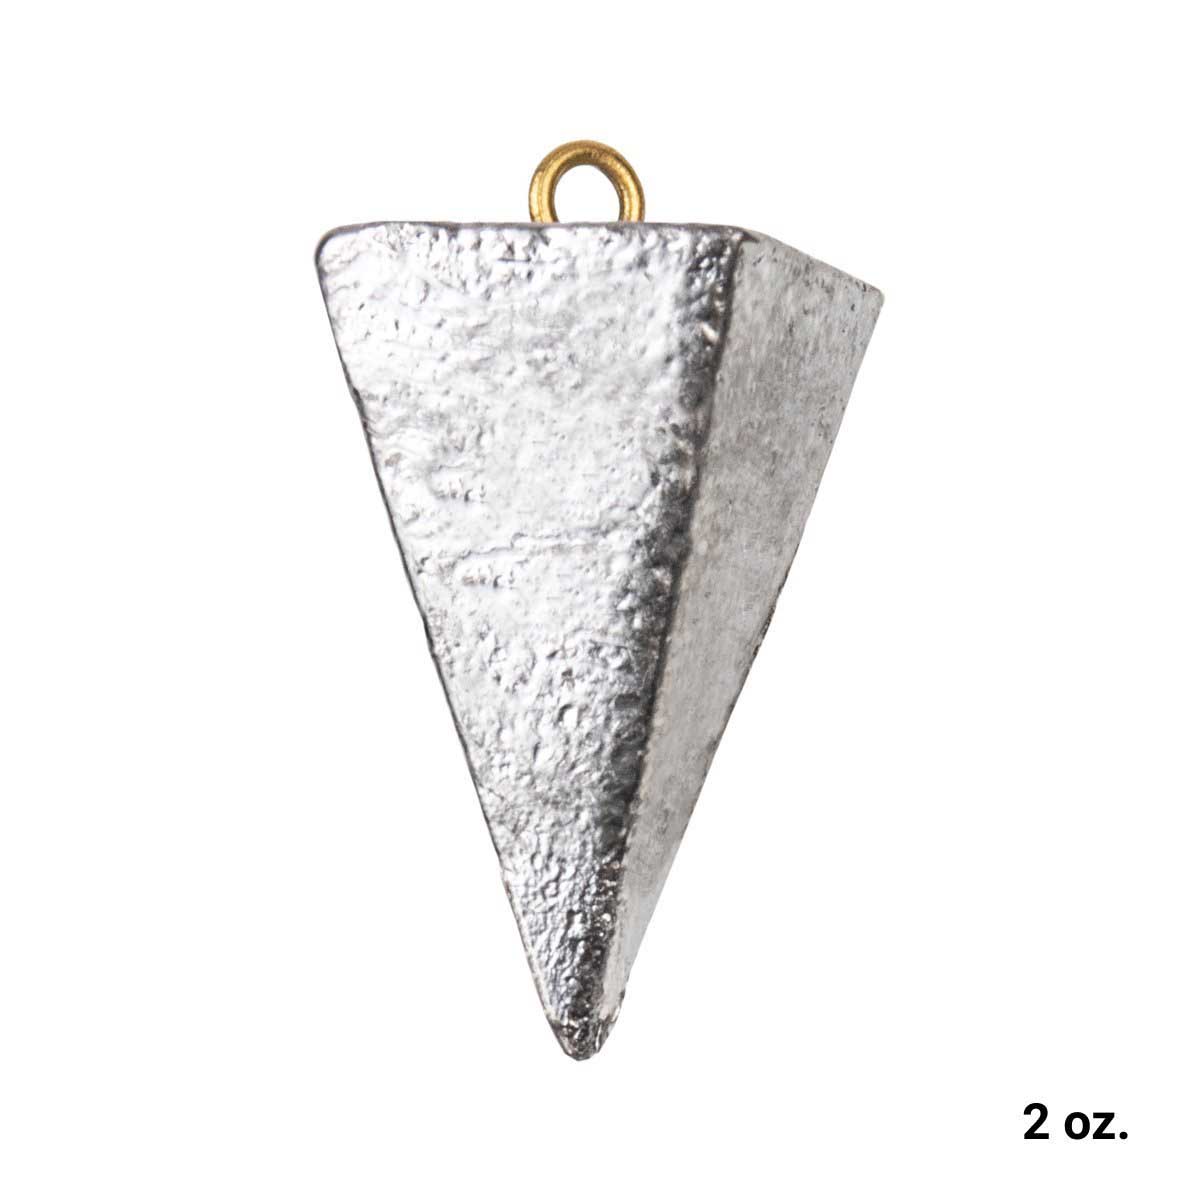 Pyramid Sinker, Lead Sinker for Freshwater and Saltwater Fishing, Weight (2 oz, 2.5 oz, 3 oz)